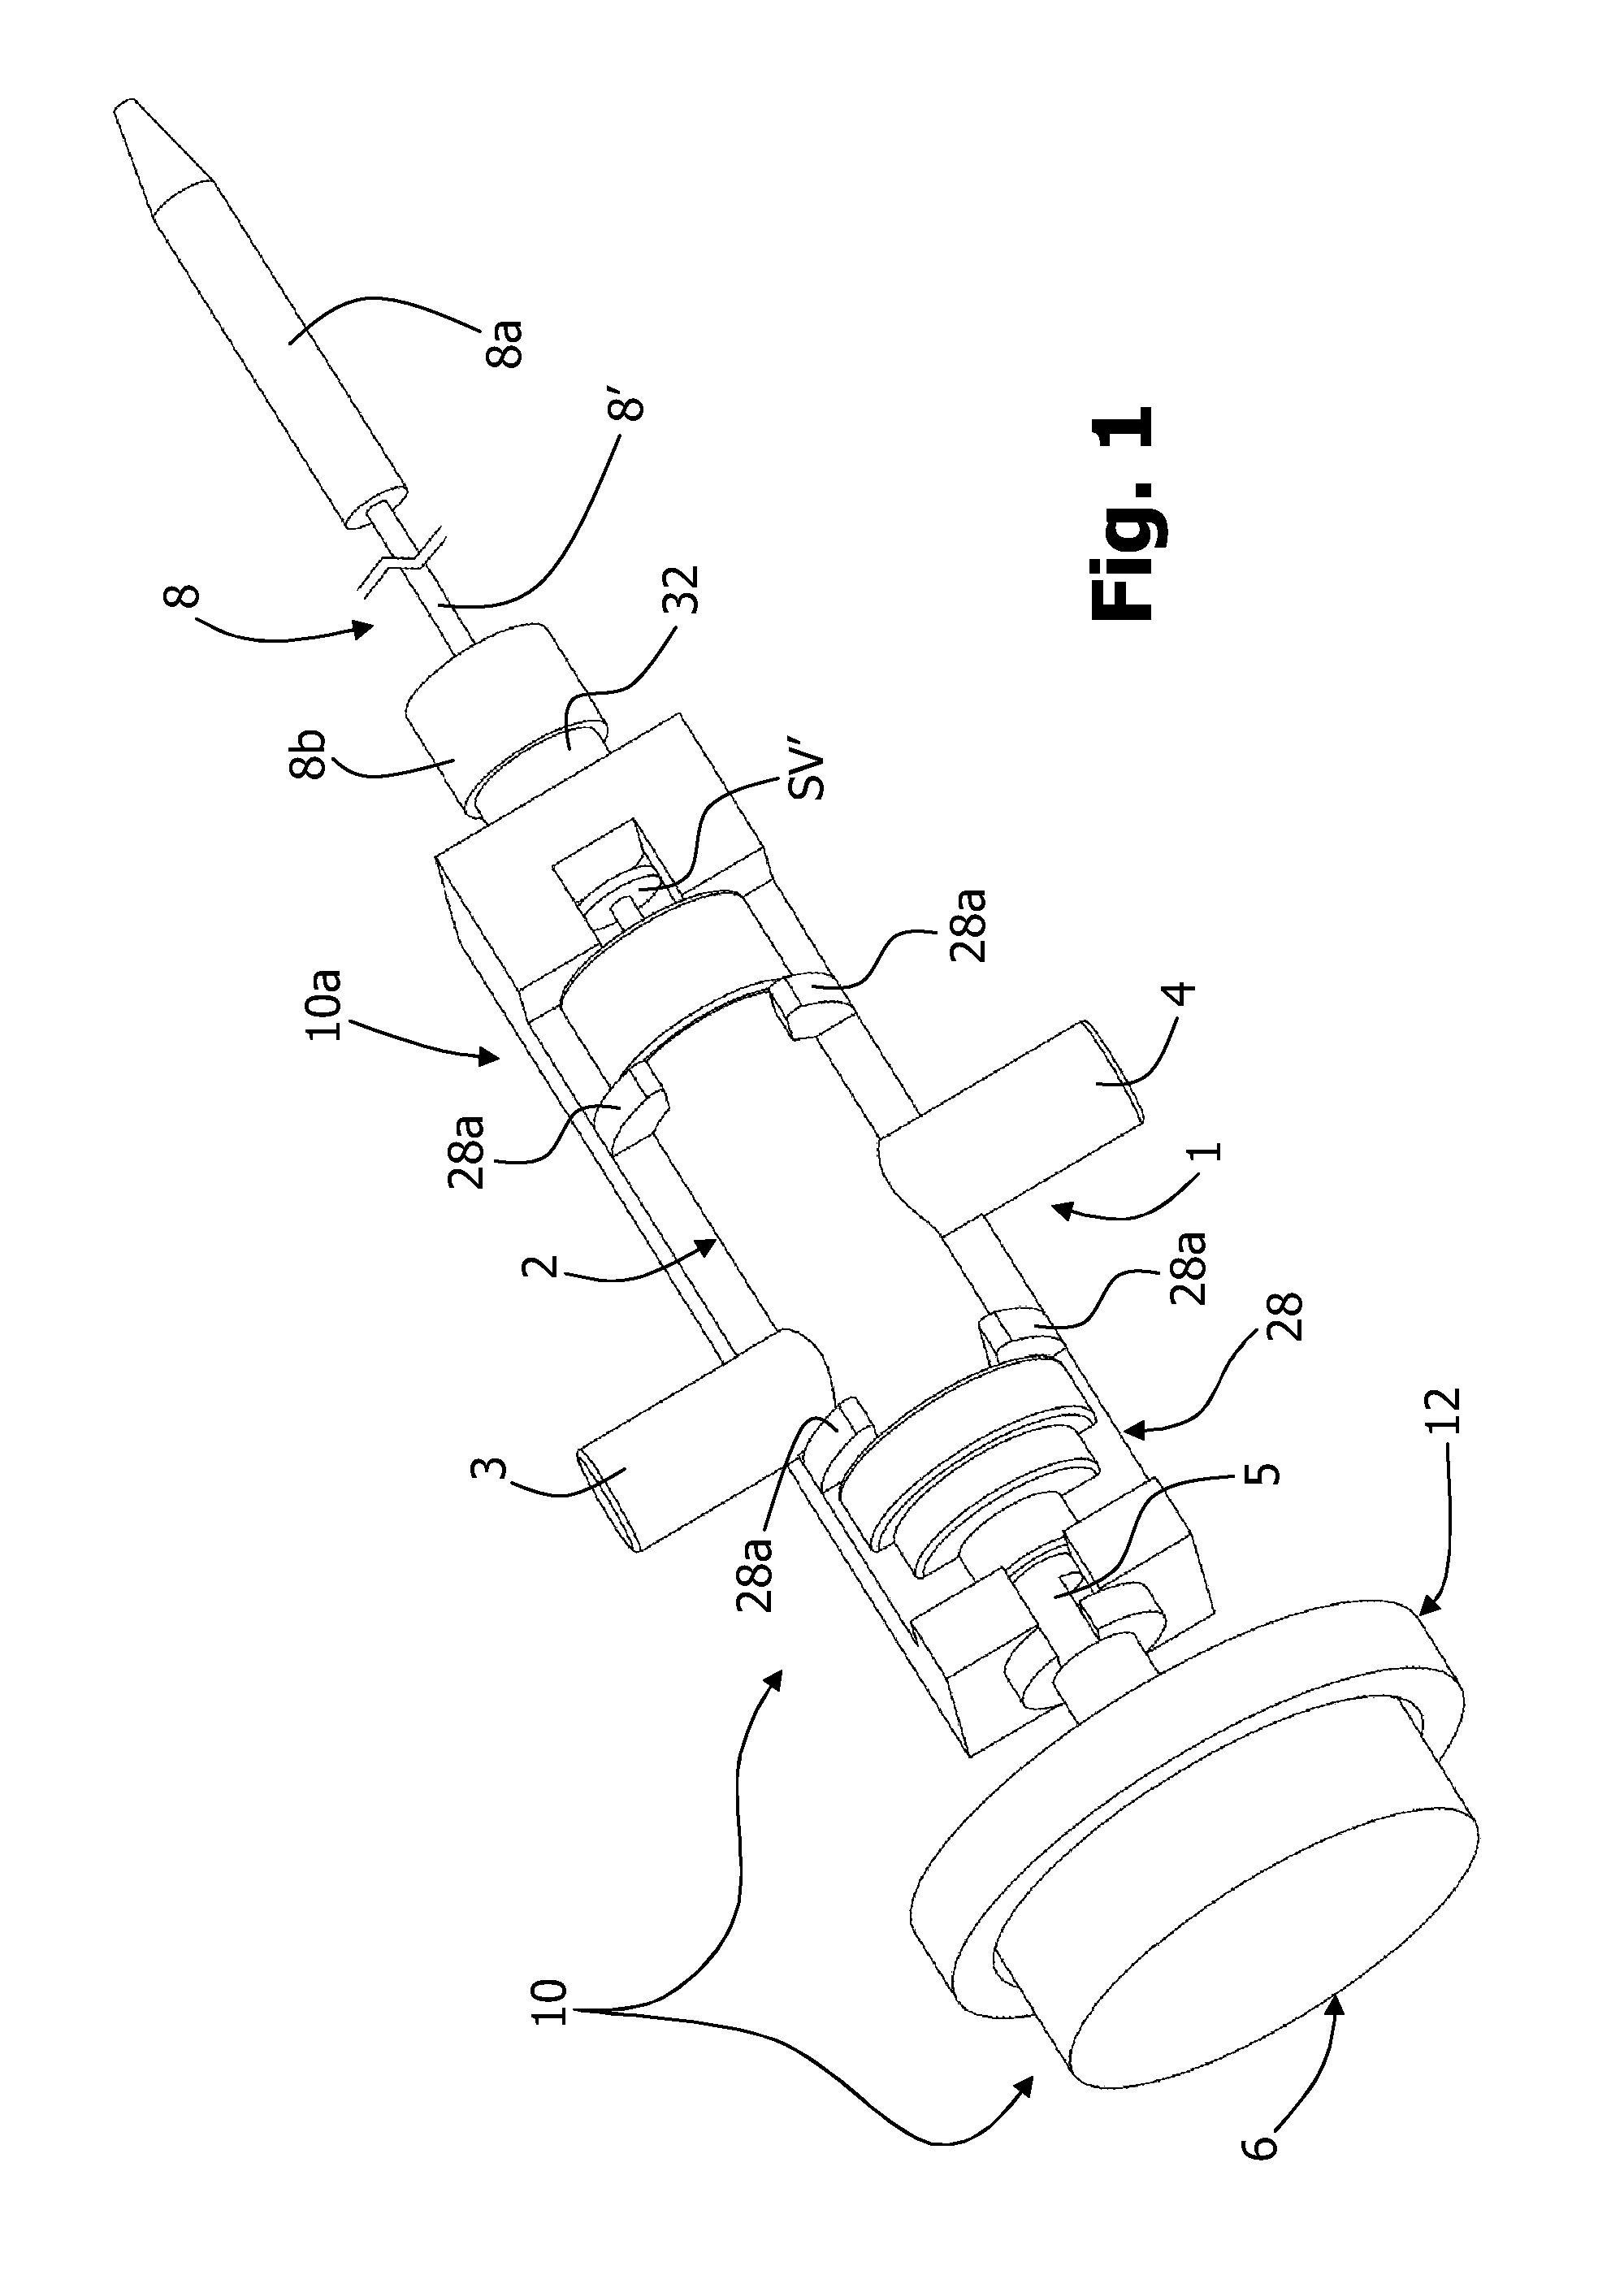 Device for controlling gas supply to a burner